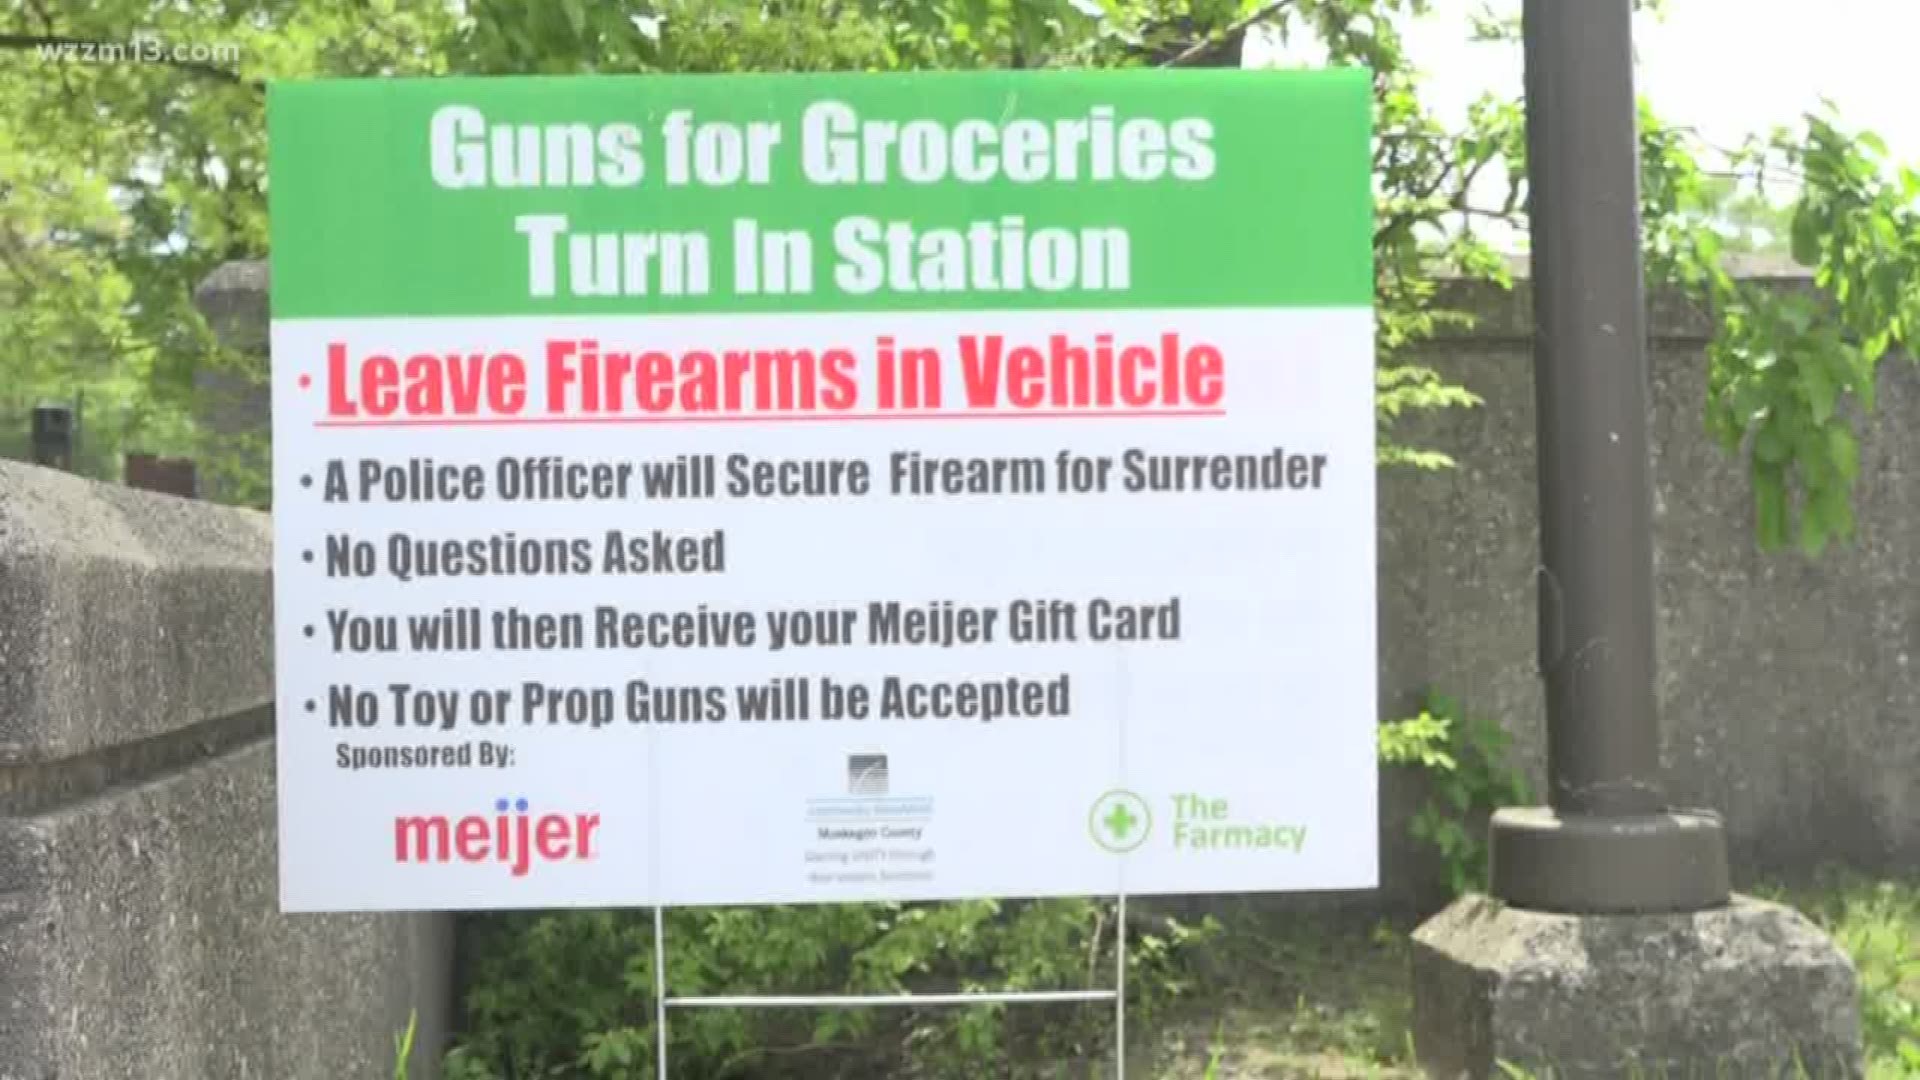 Guns for Groceries event collects more than 130 firearms